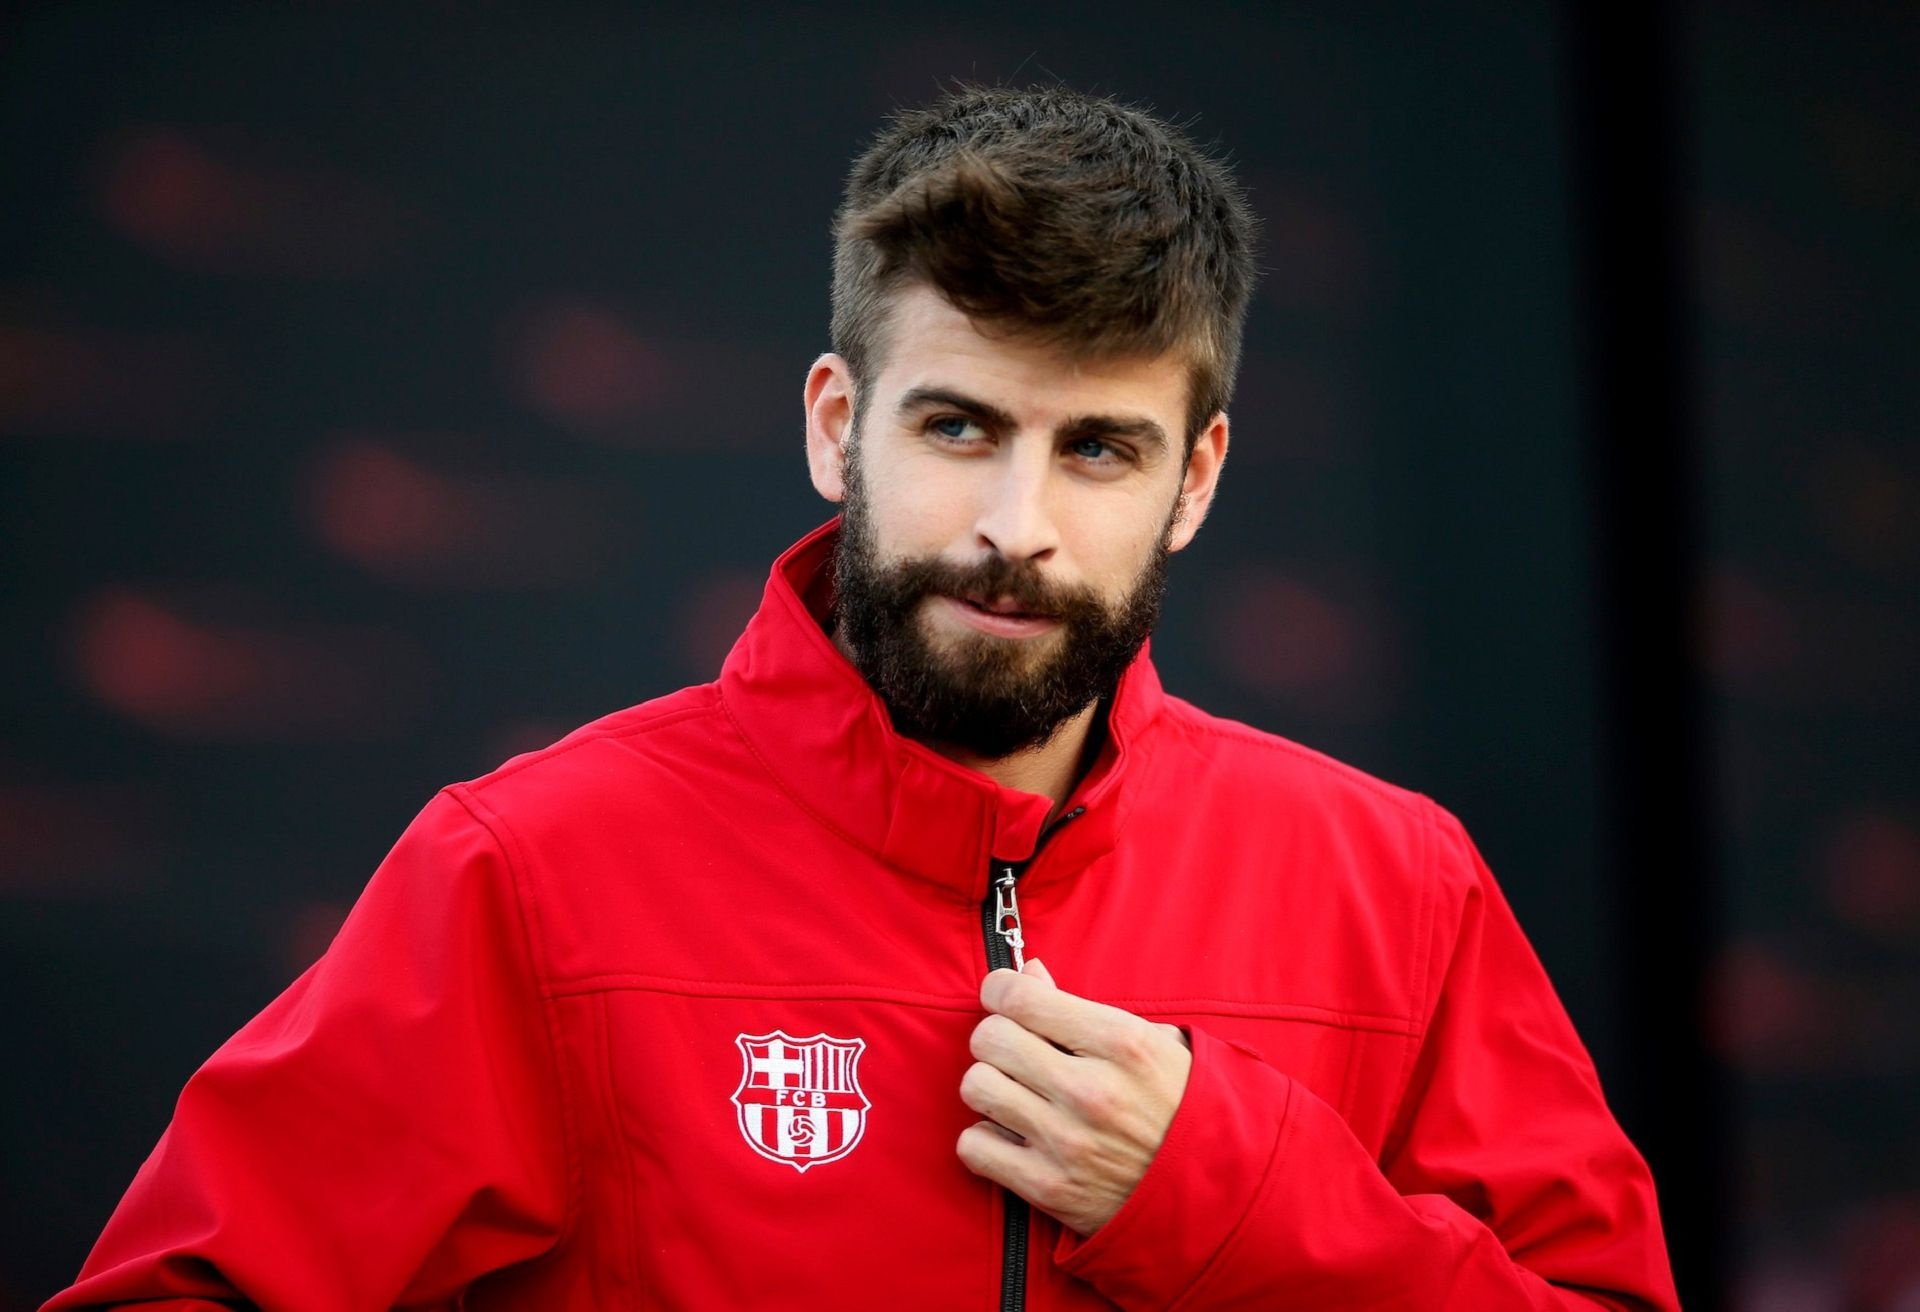 Gerard Pique: One of the best defenders in world football. 1920x1320 HD Wallpaper.